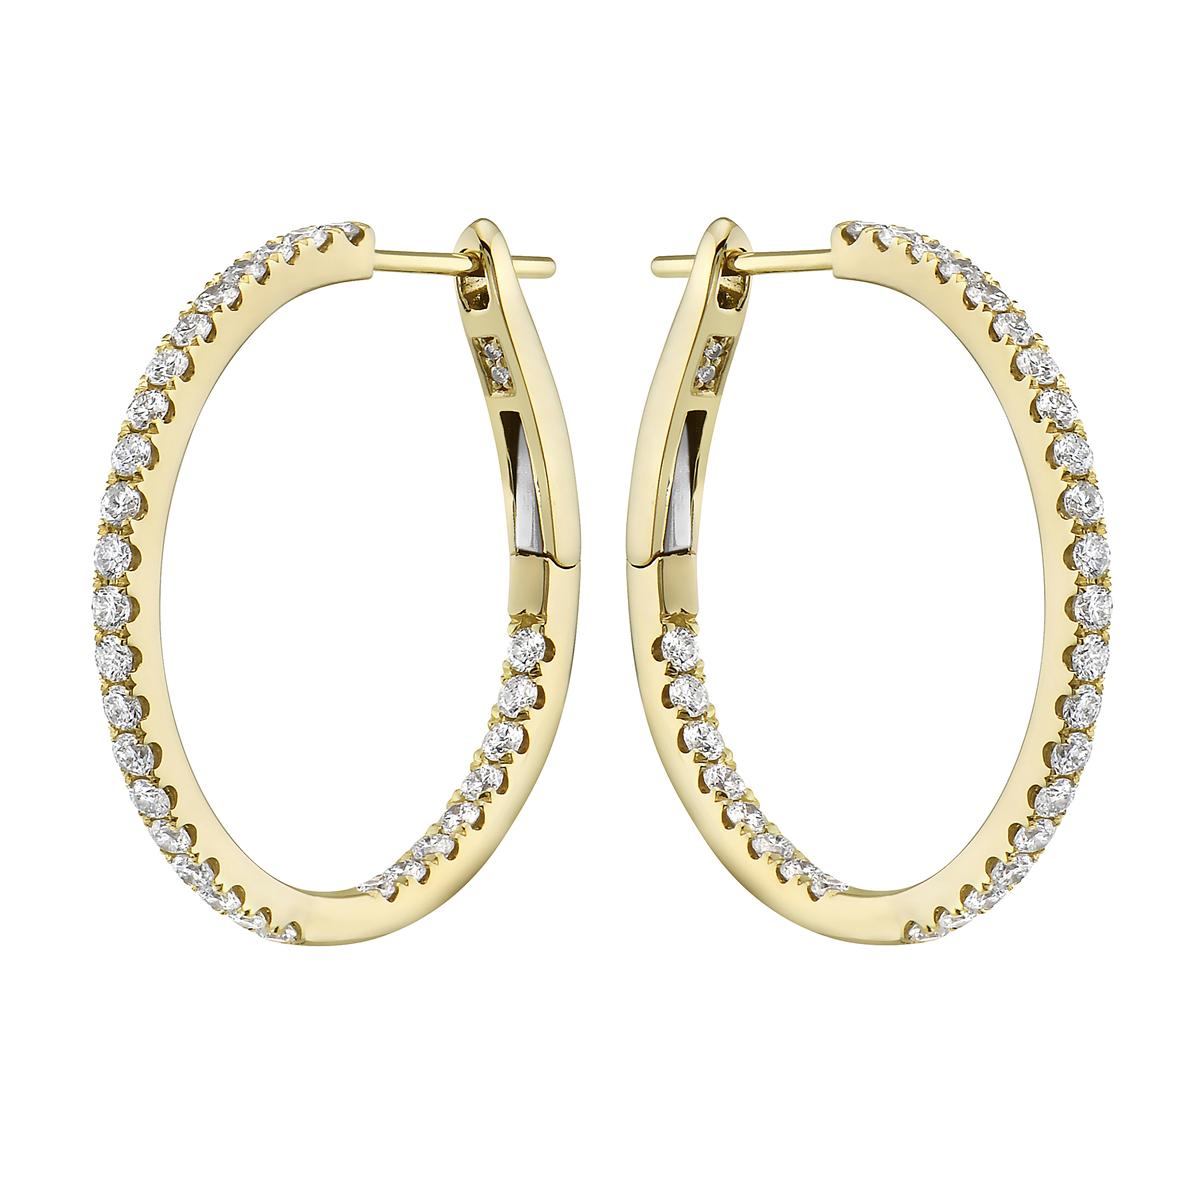 These classic hoops never go out of style and can be worn all the time! These hoops are even more special because the diamonds are on the outside and the inside so you get beautiful sparkle from every angle. There are 62 round SI1-OS12, GH color